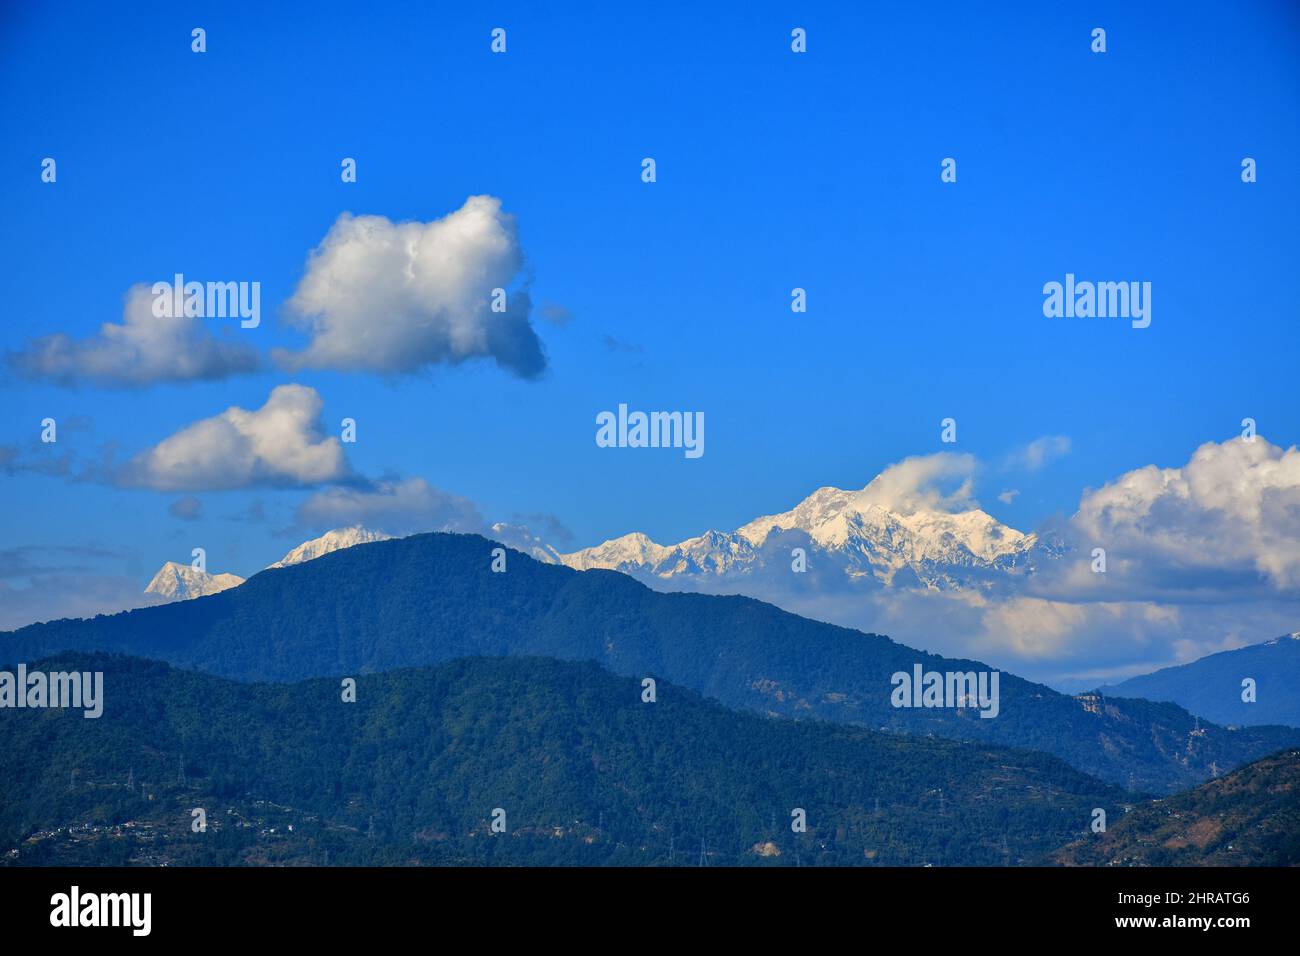 Mountain ridges in the clouds with Mt. Kanchenjunga range Stock Photo